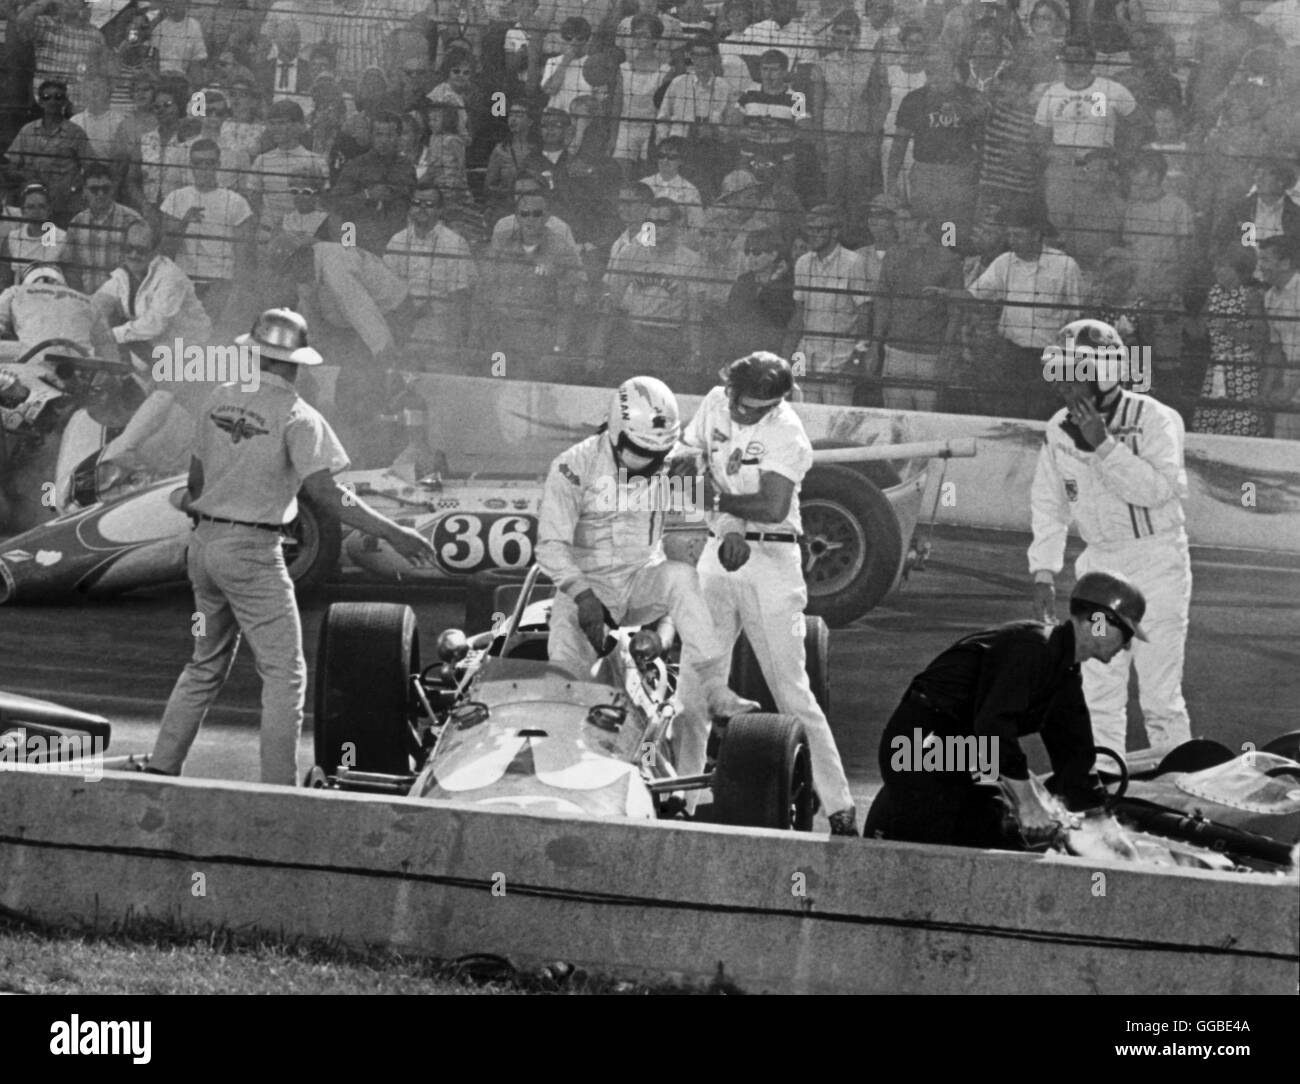 WINNING USA 1969 James Goldstone Drivers, mechanics and fireman all get involved during a wreck in one of the test runs before an important race. Regie: James Goldstone Stock Photo